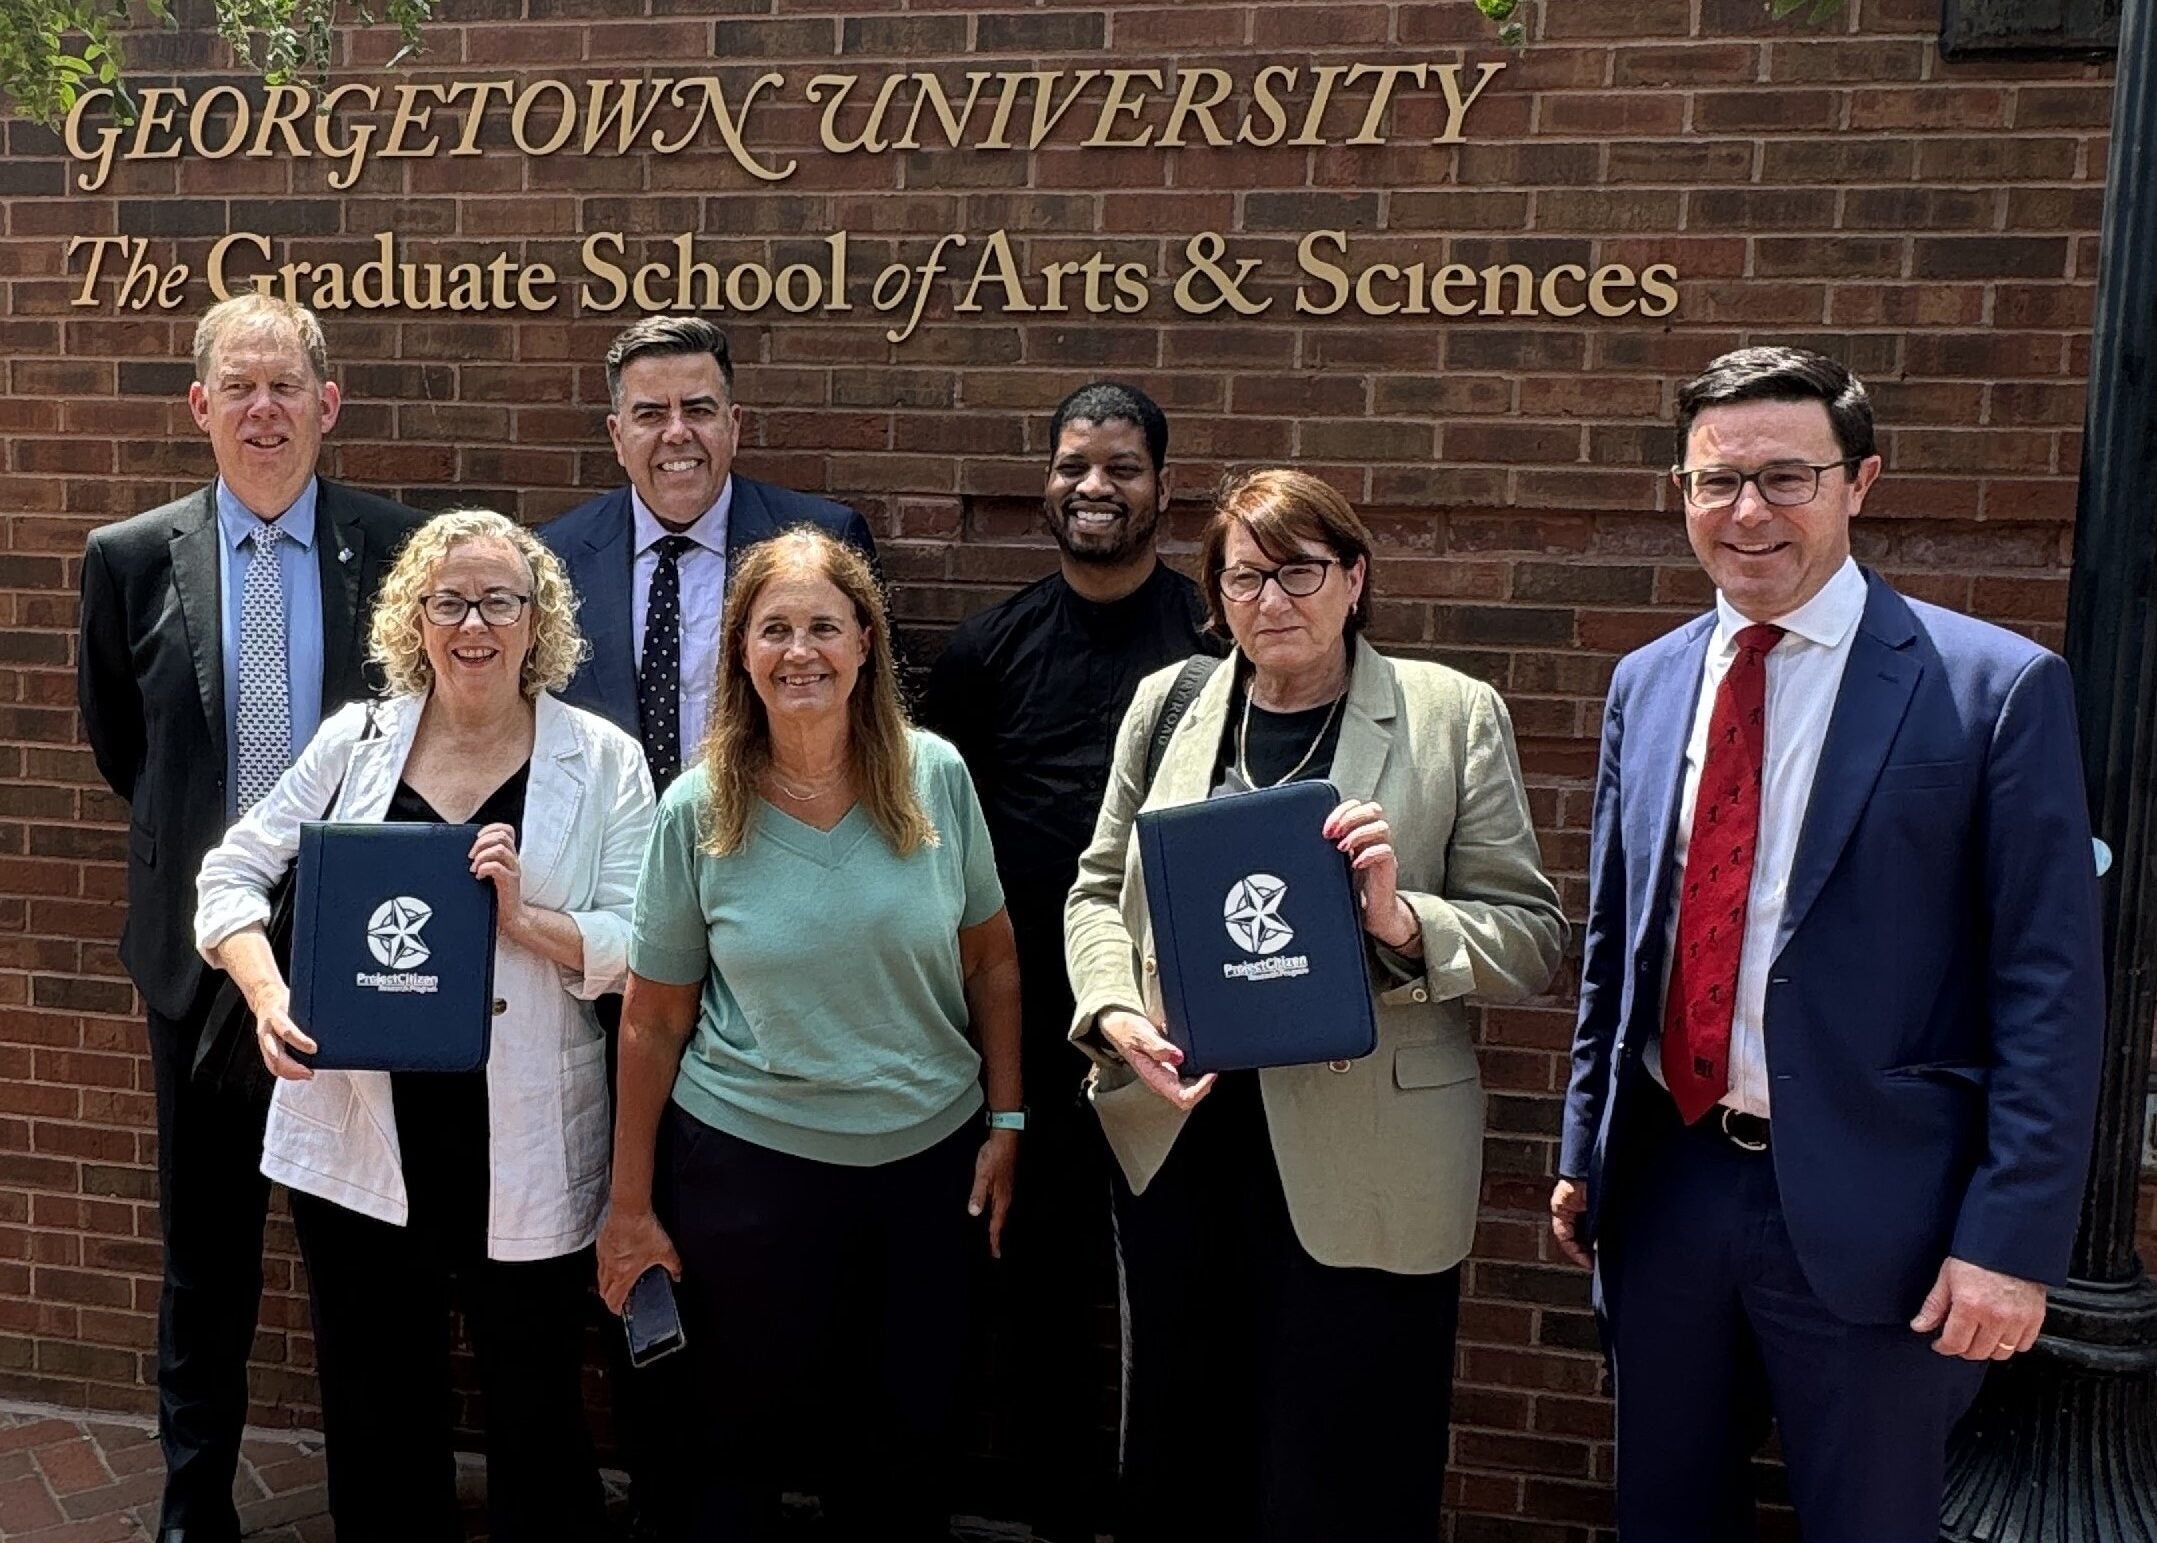 Australian parliamentary delegation visits Dr. Diana Owen, Director of CERL, and Bradlee Sutherland, CERL Research Specialist, at Georgetown University.